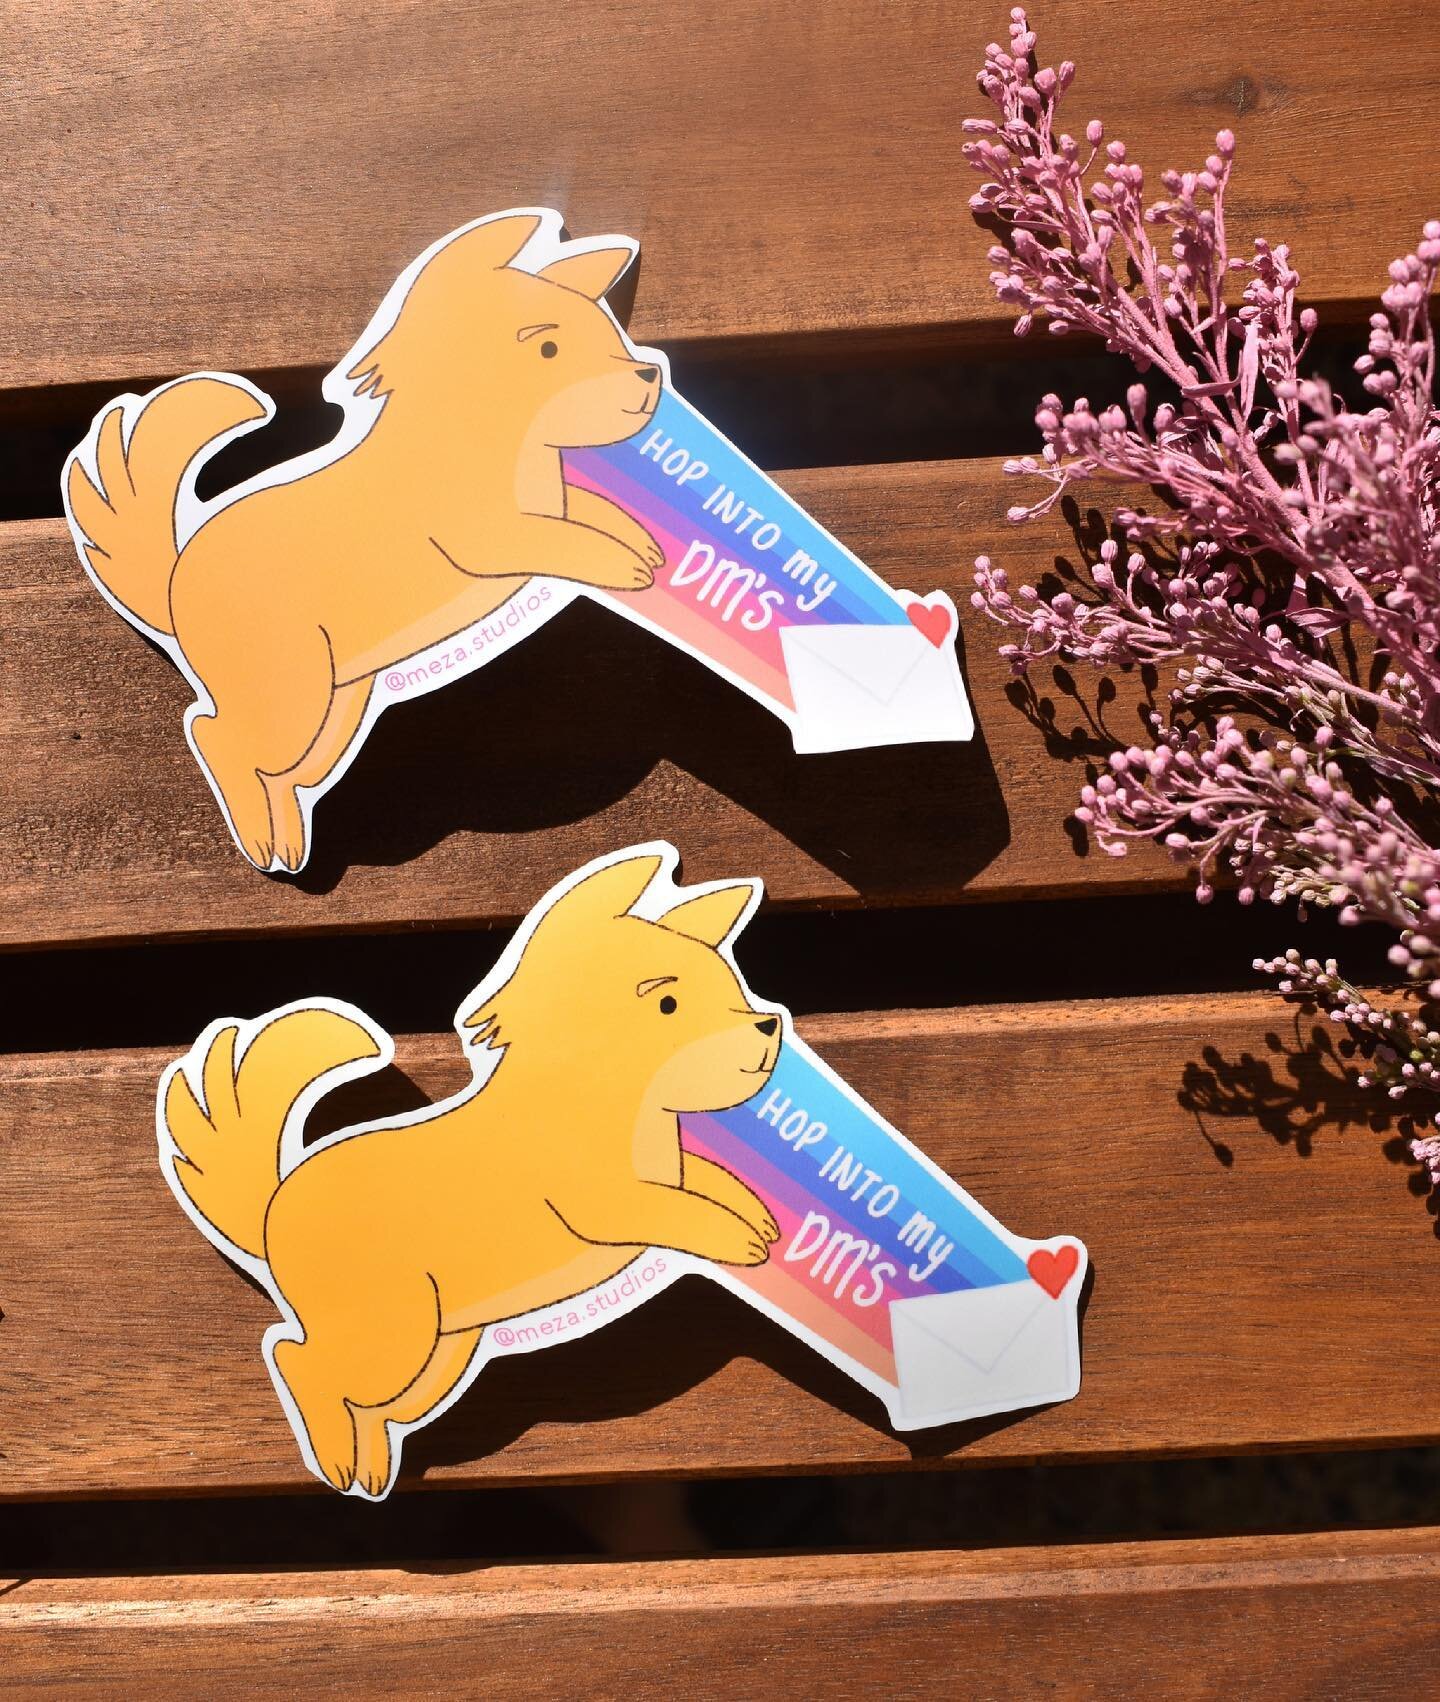 Hop into my DMs, whatcha waiting for? 😏😉☺️ Shop (Link in bio)

#stickers #cute #cutedogs #yellow #art #illustrationartists #latina #latinaownedbusiness